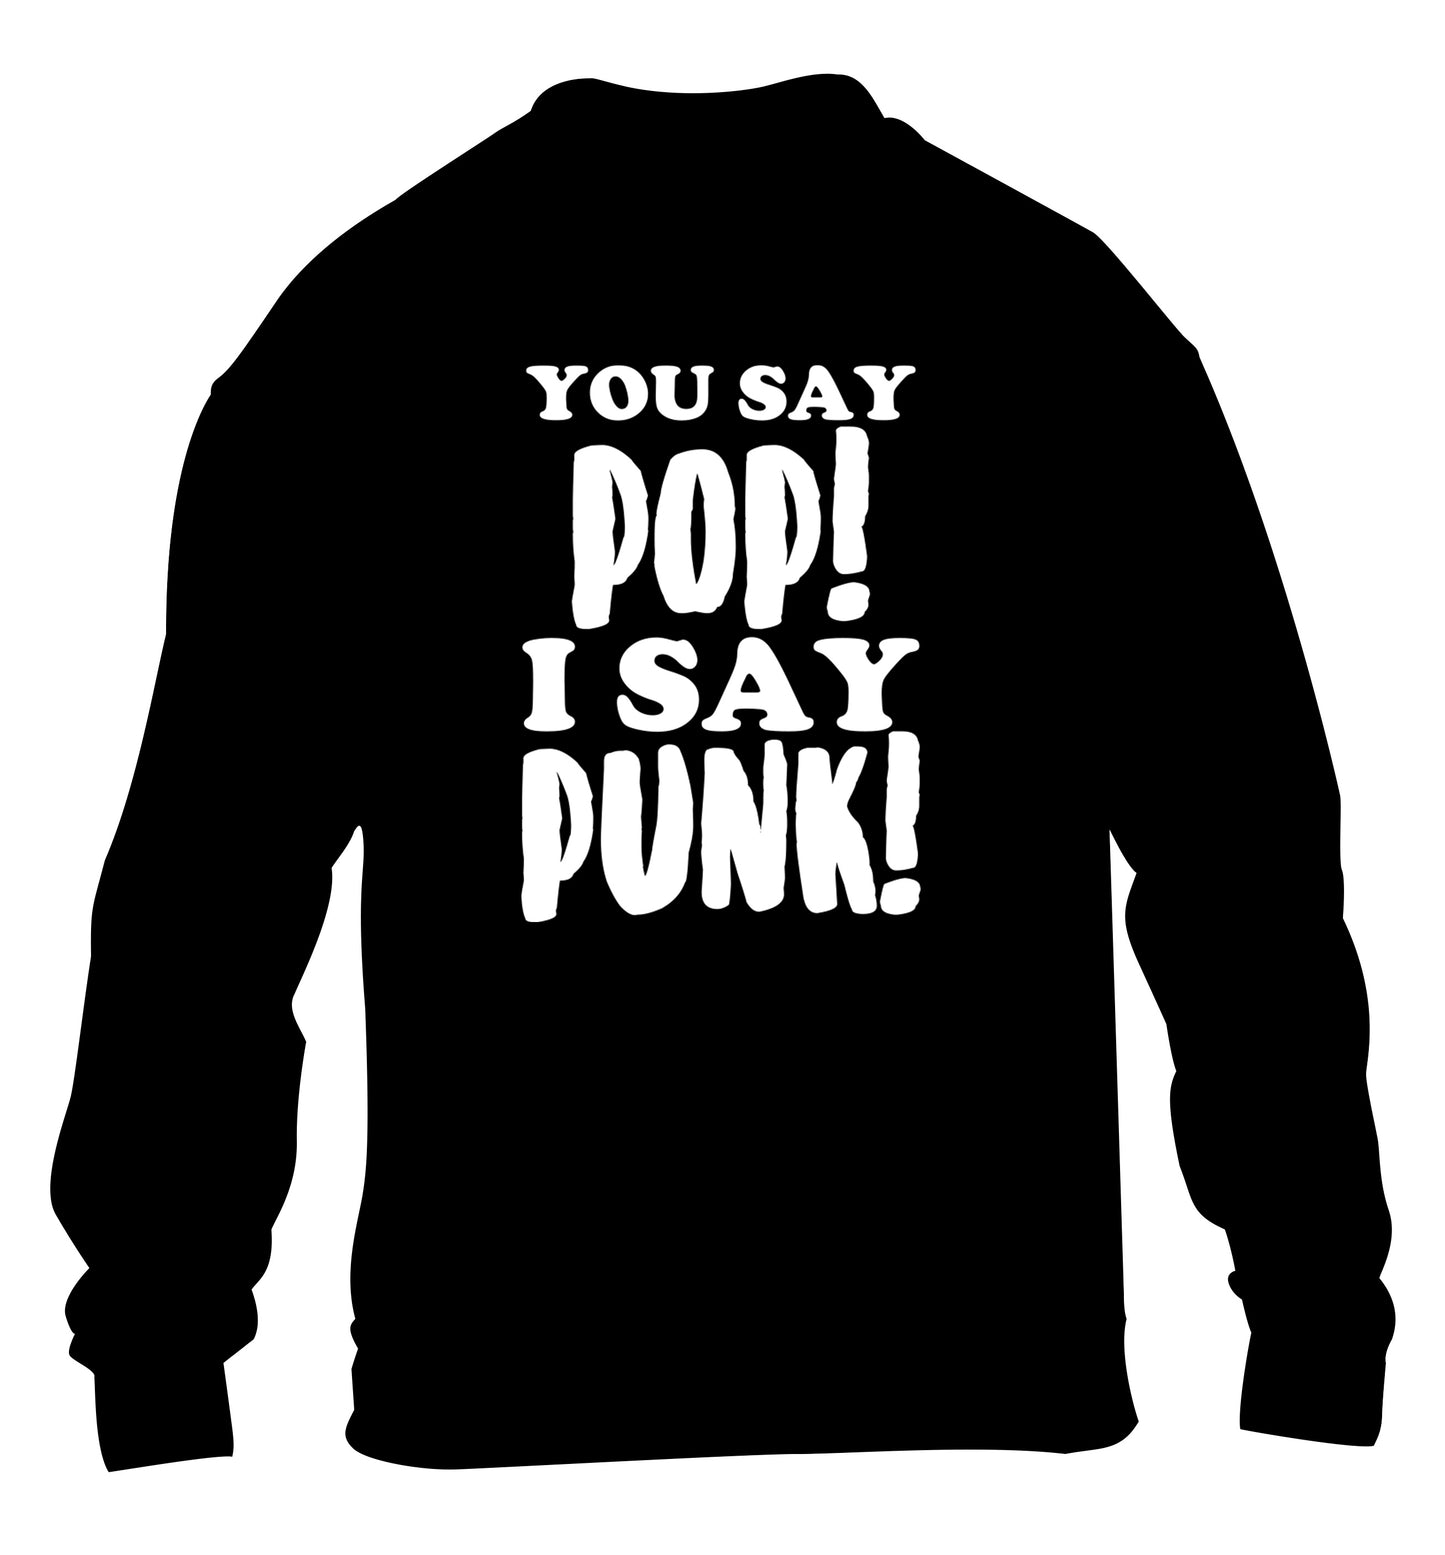 You say pop I say punk! children's black sweater 12-14 Years